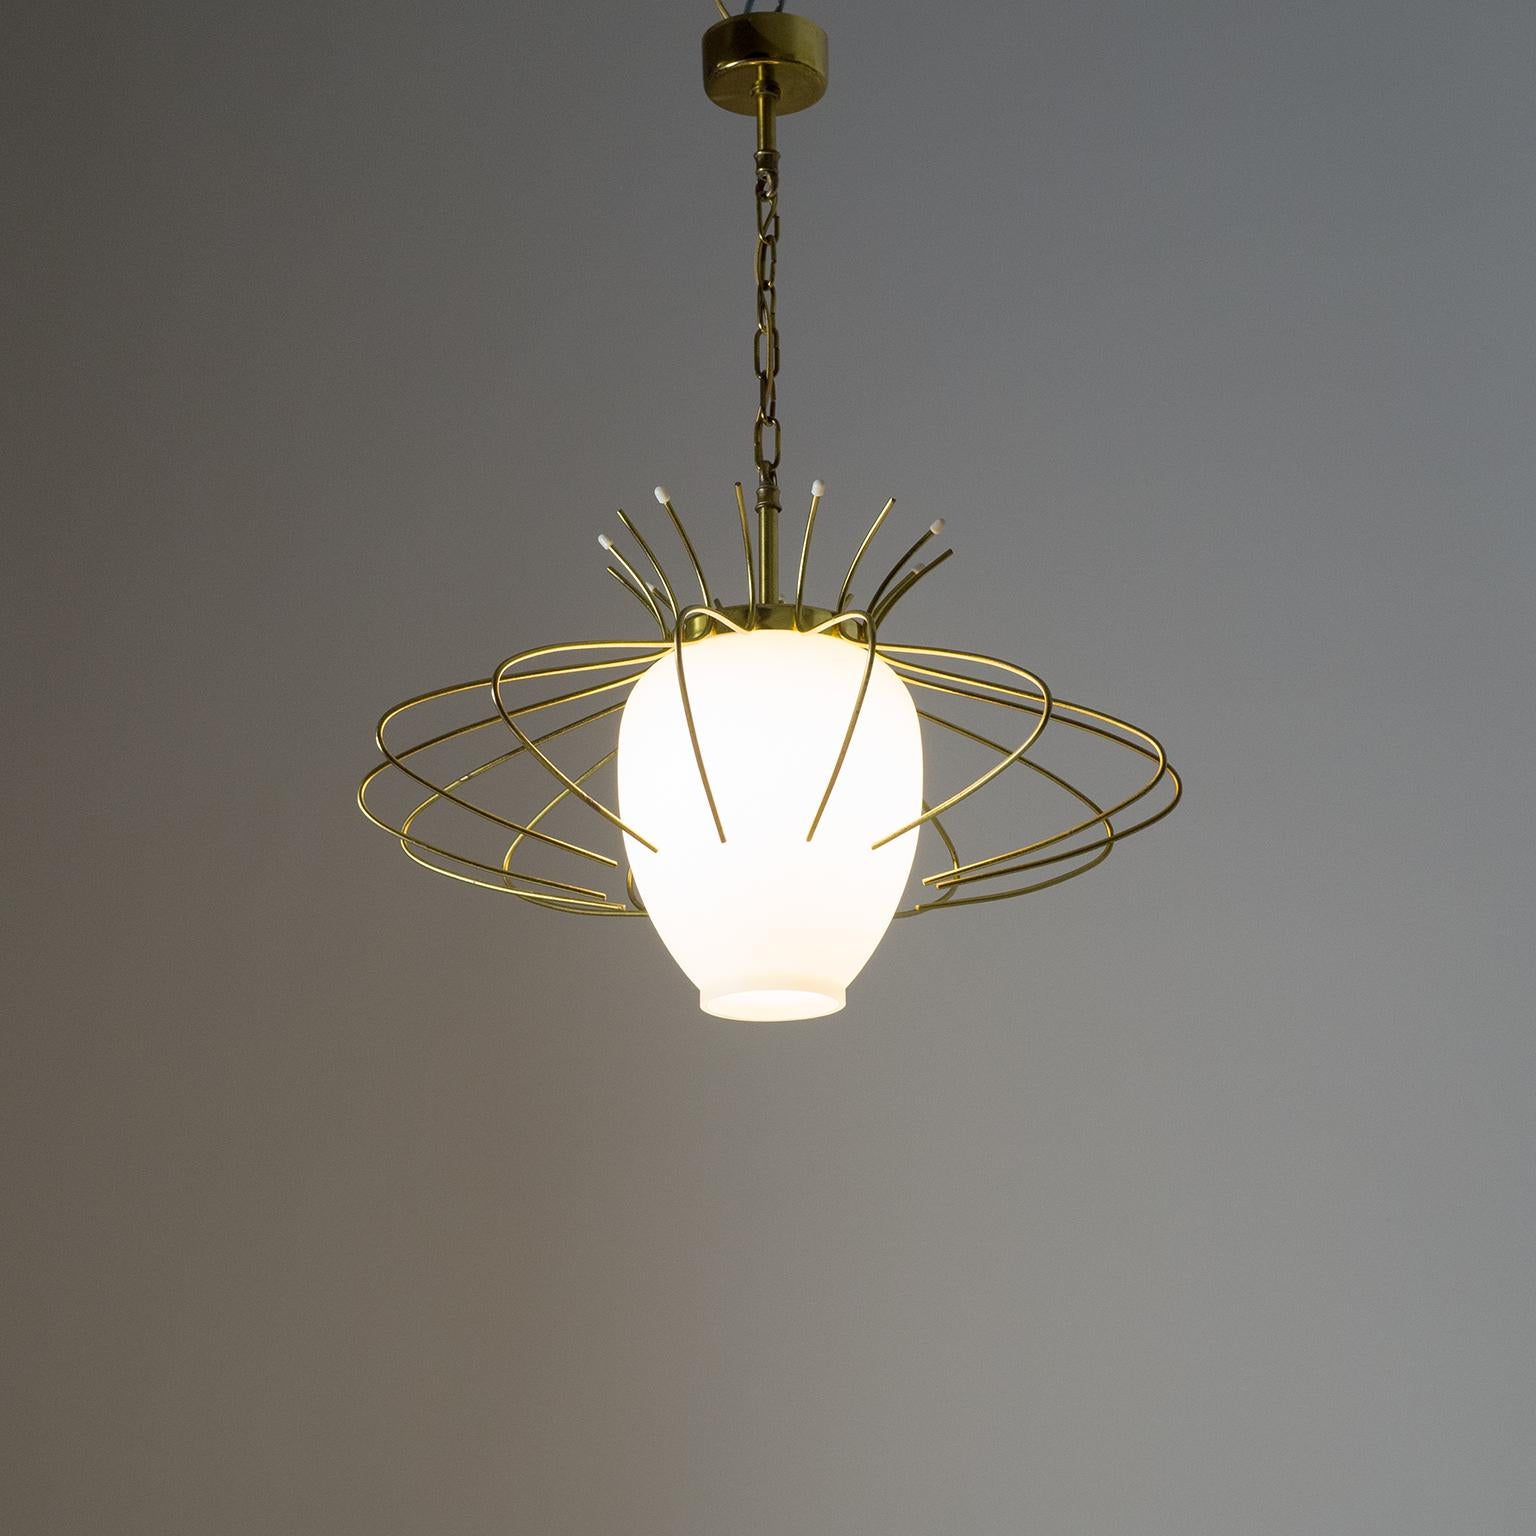 Mid-Century Modern French Modernist Pendant, 1960s, Brass and Satin Glass